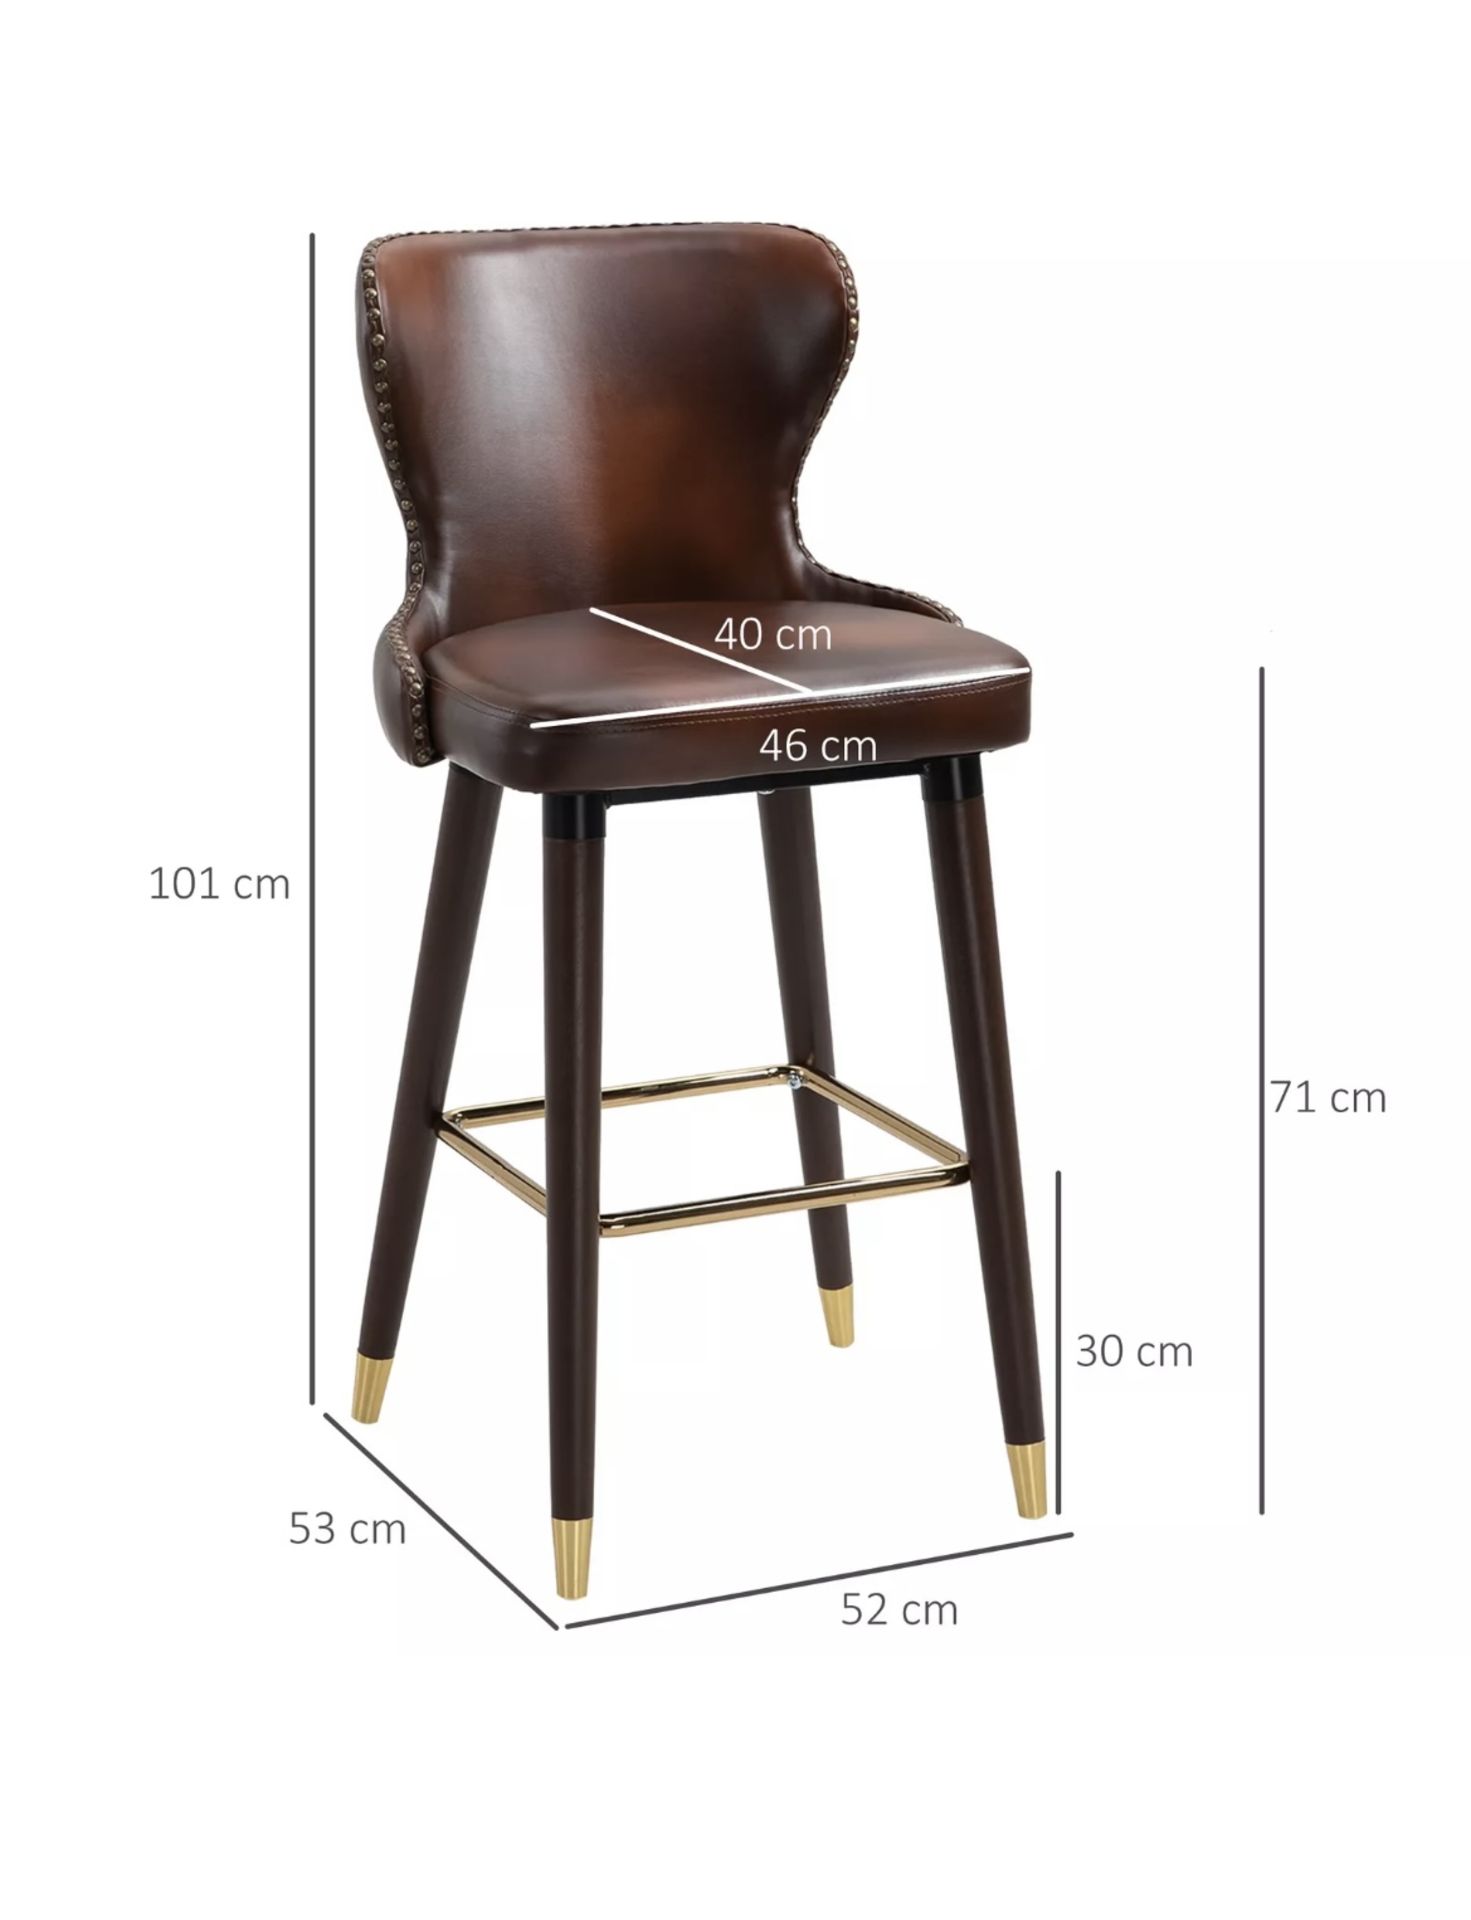 LUXURY SOLID BAR STOOLS SET OF 2 WITH BACK, PU LEATHER UPHOLSTERY, BROWN - Bild 2 aus 2